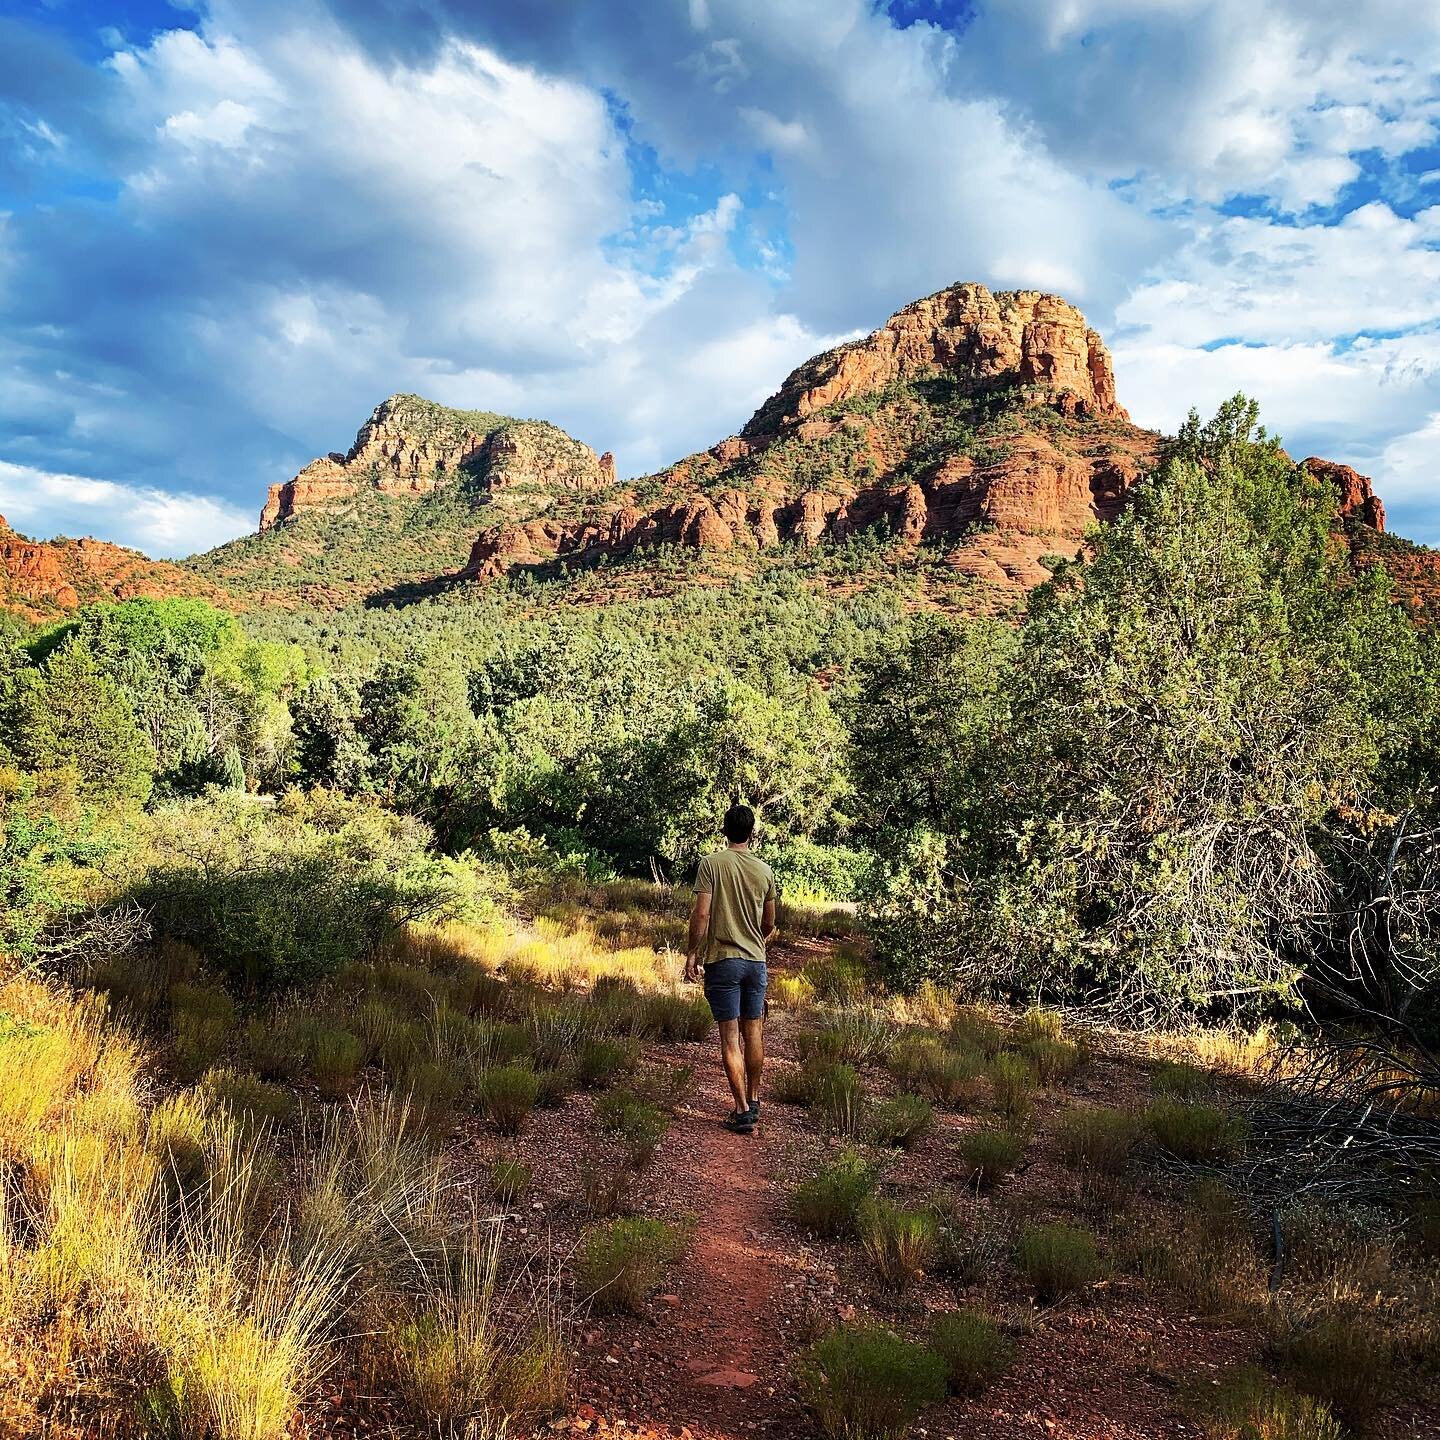 Hiking in beautiful #sedona Honestly, these views never get old!